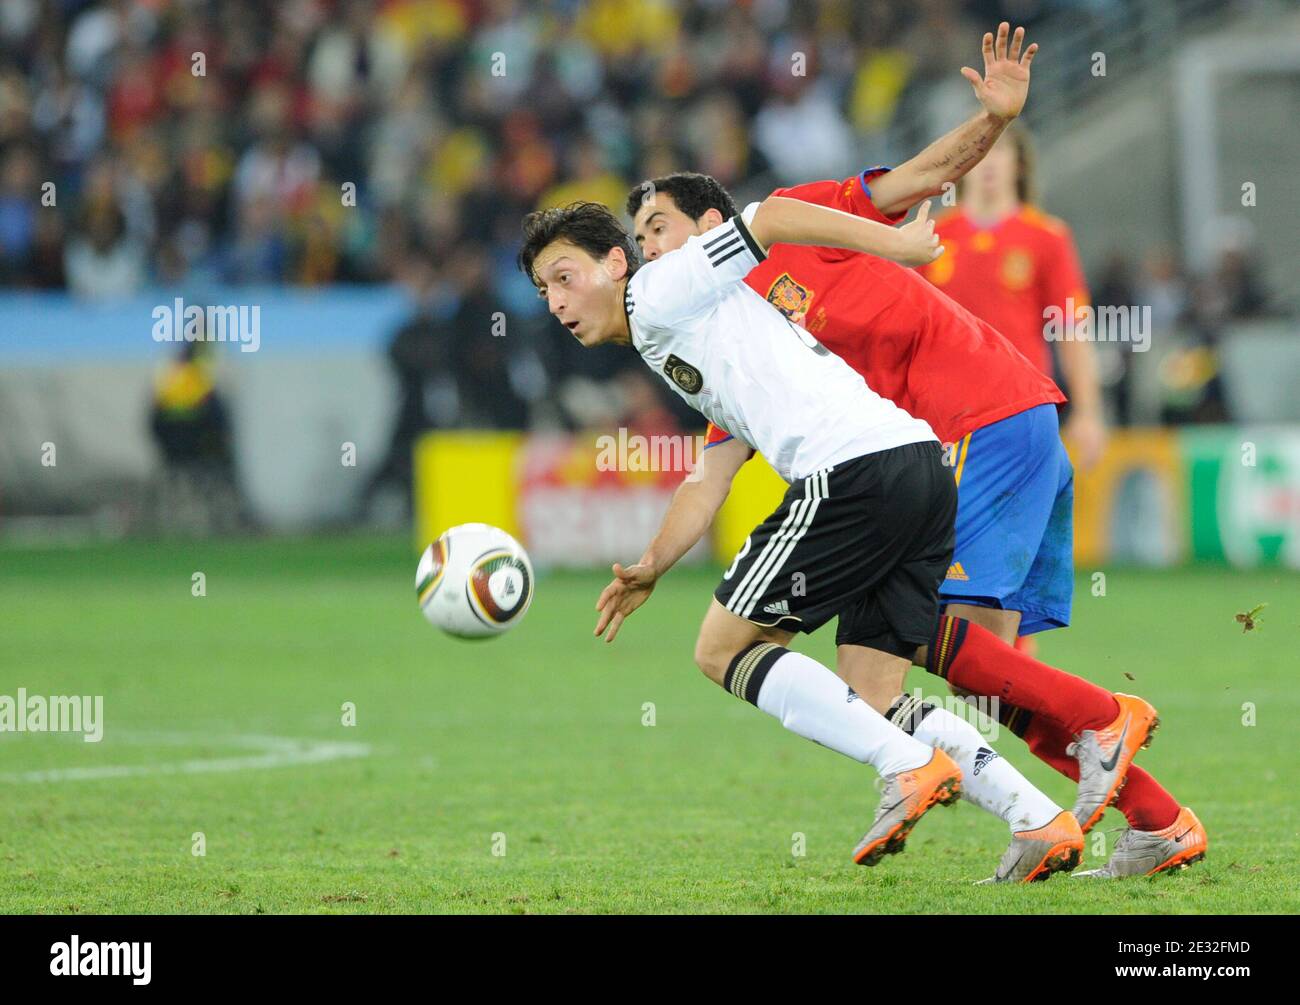 Spain's Sergio Busquets battles for the ball with Germany's Mesut Oezil during the 2010 FIFA World Cup South Africa, Semi-Final, Soccer match, Spain vs Germany at Moses Mabhida football stadium in Durban, South Africa on July 7th, 2010. Spain won 1-0. Photo by Henri Szwarc/ABACAPRESS.COM Stock Photo